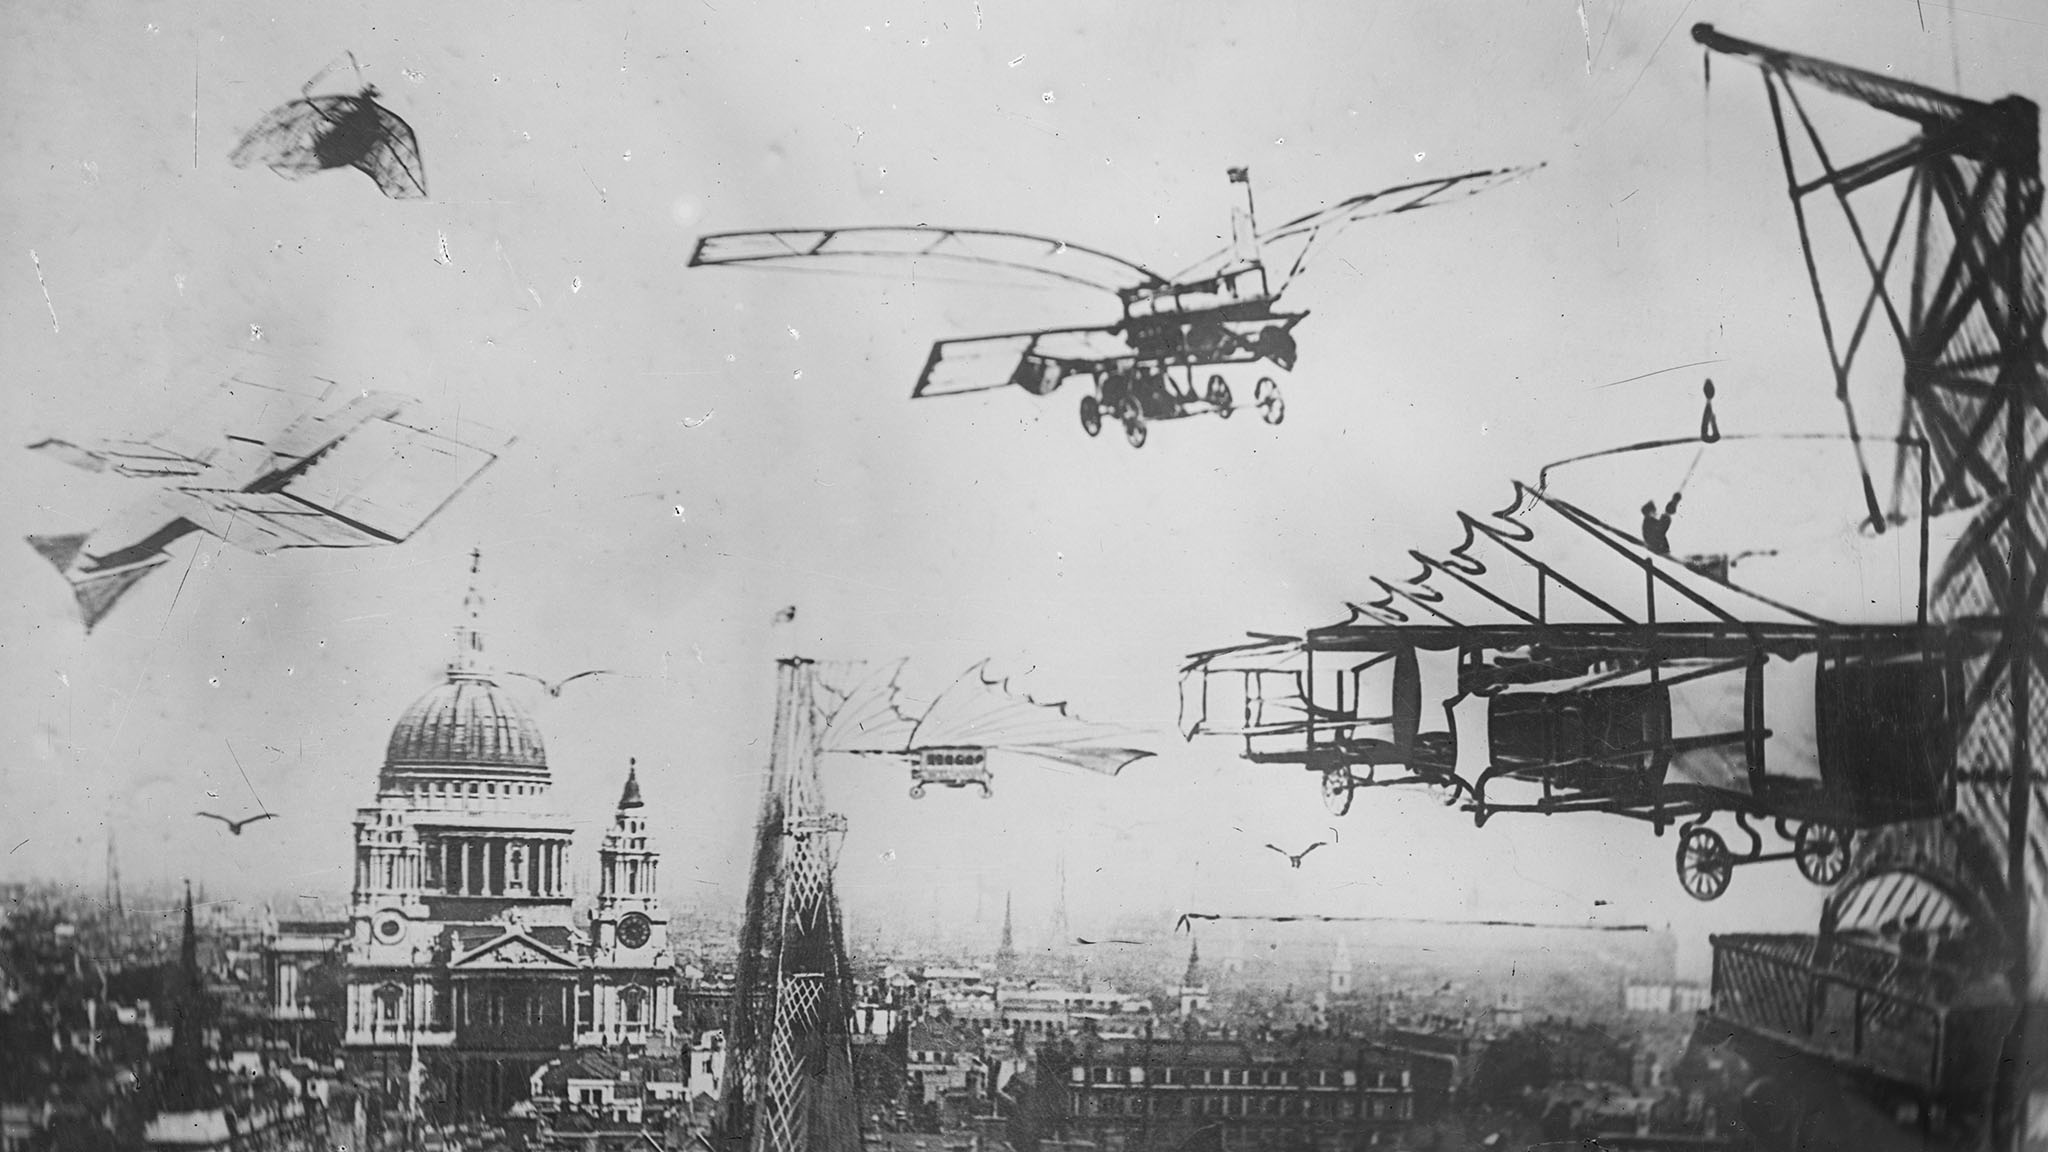 Archive black and white photograph of a city and a domed cathedral, with early imaginary flying machines superimposed on it.